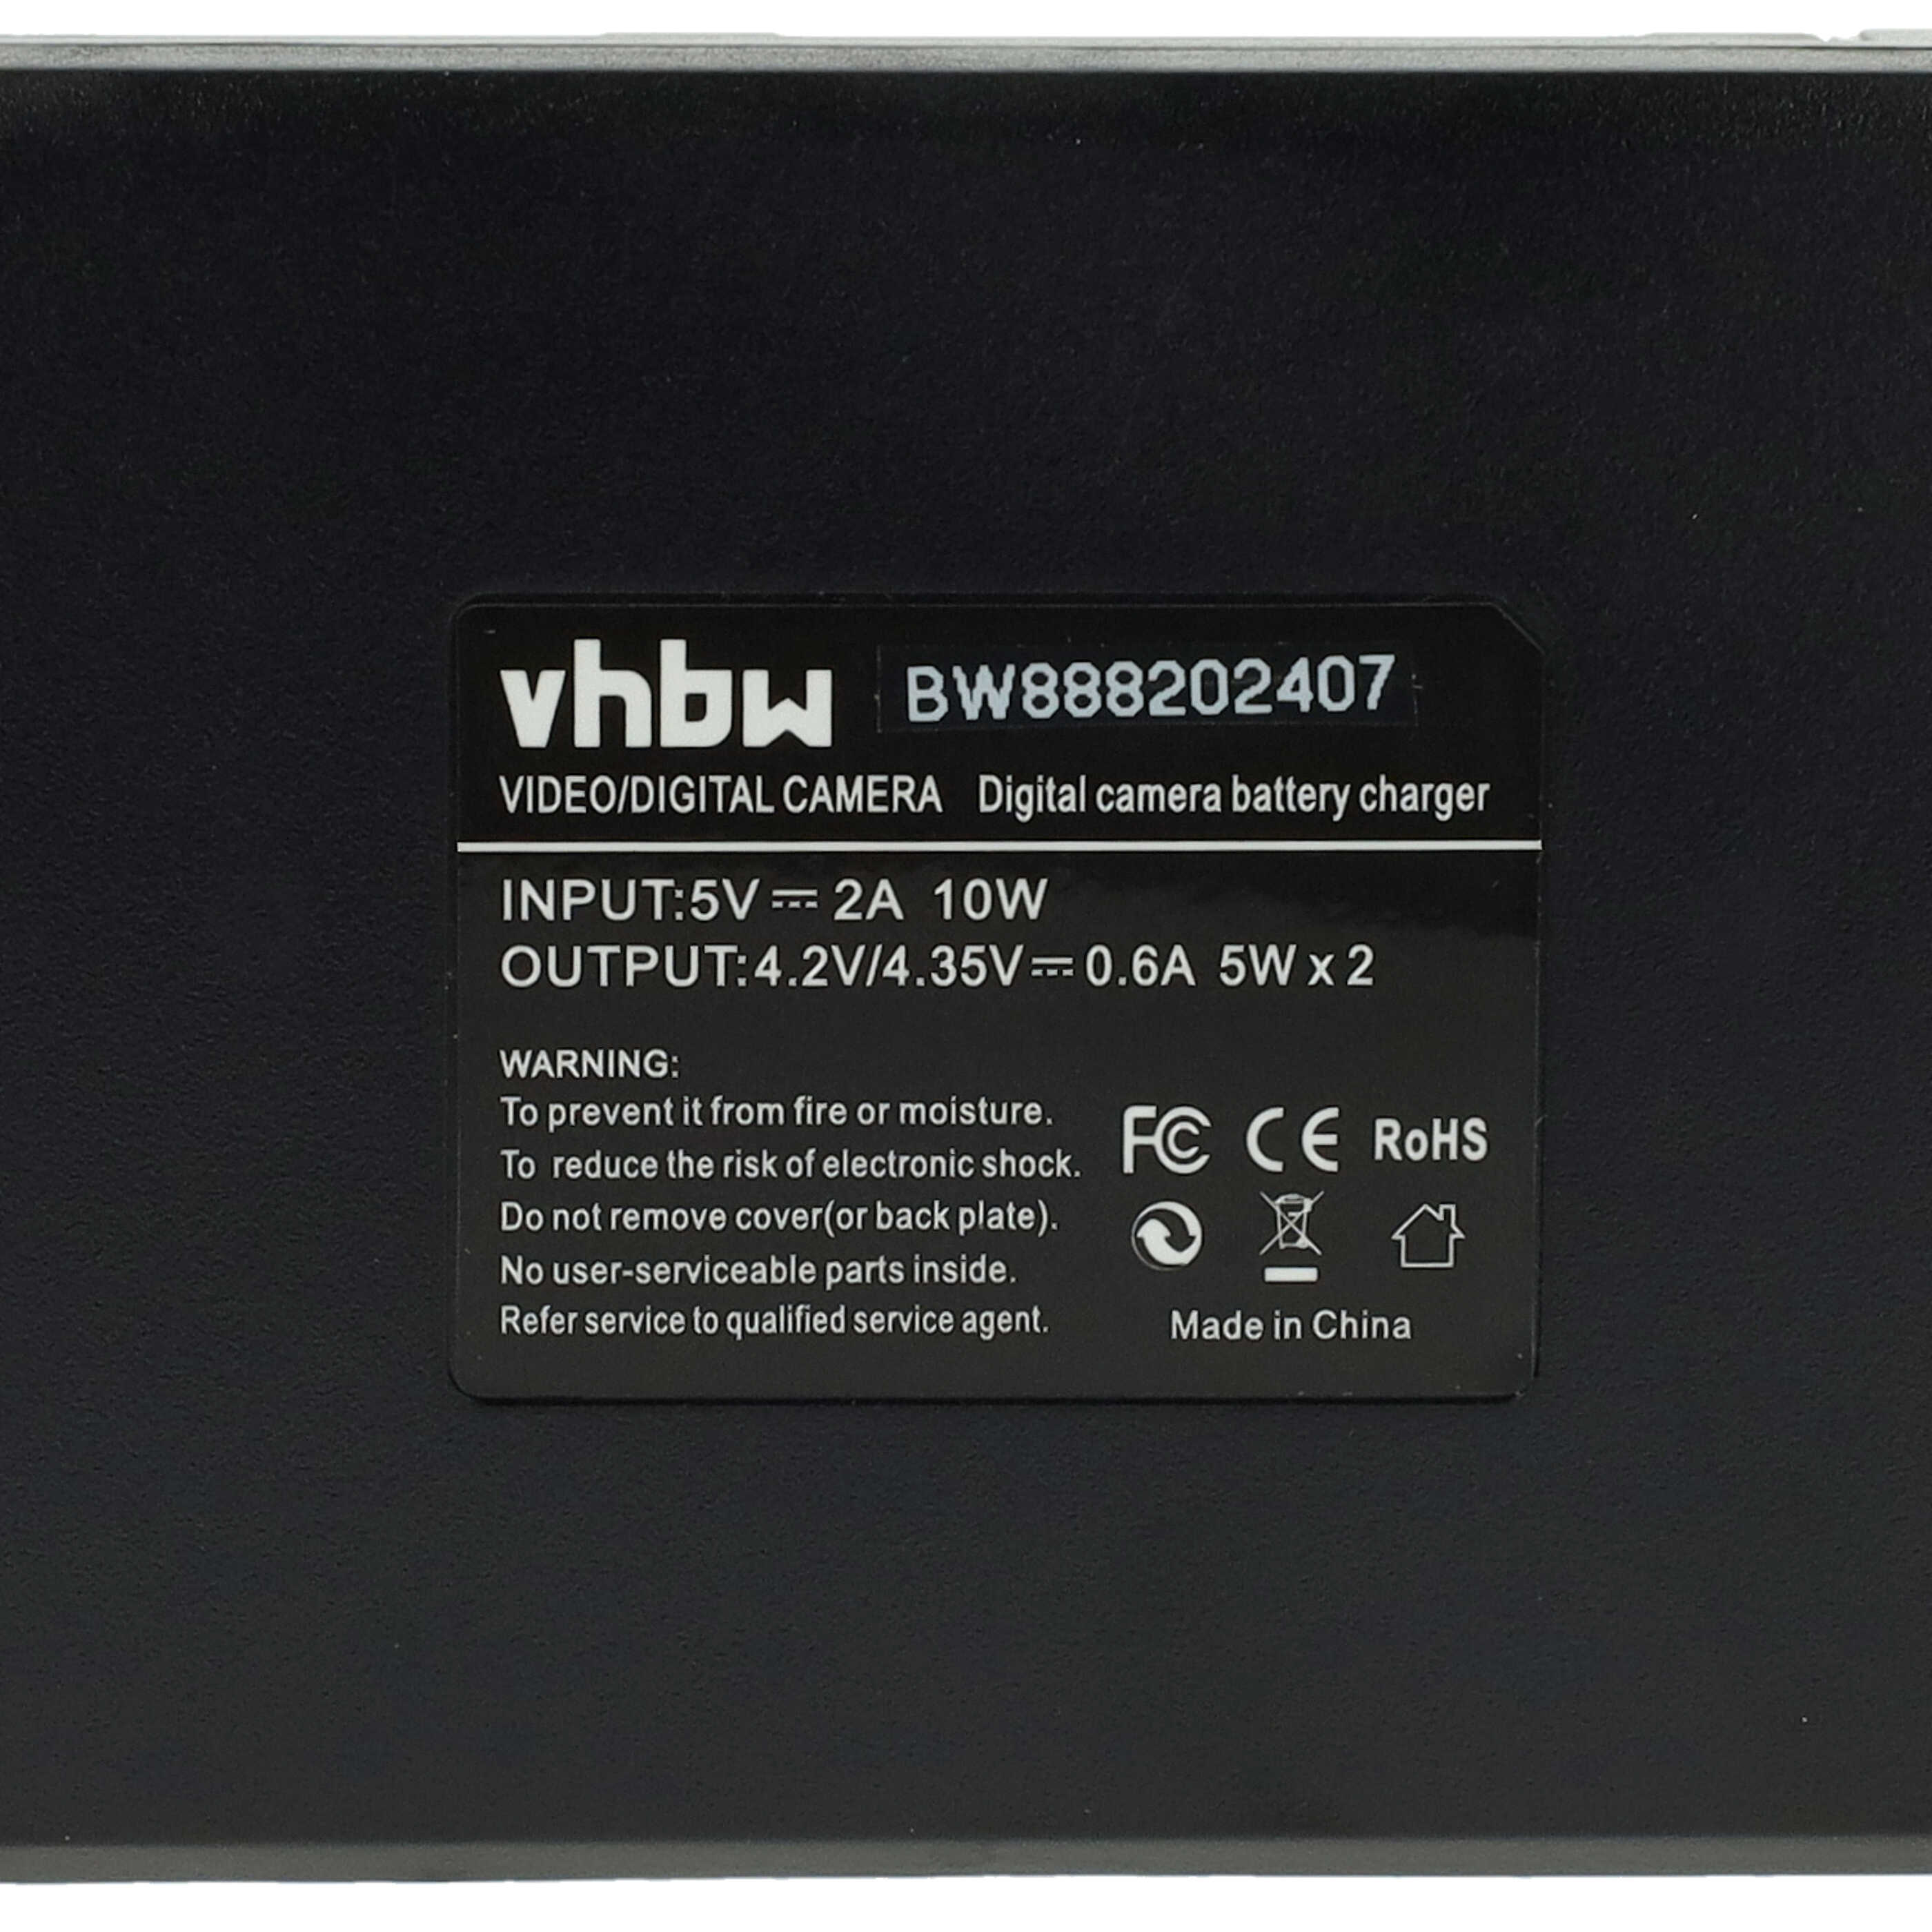 Battery Charger suitable for Agfa / Agfaphoto Digital Camera - 0.5 A, 4.2 V